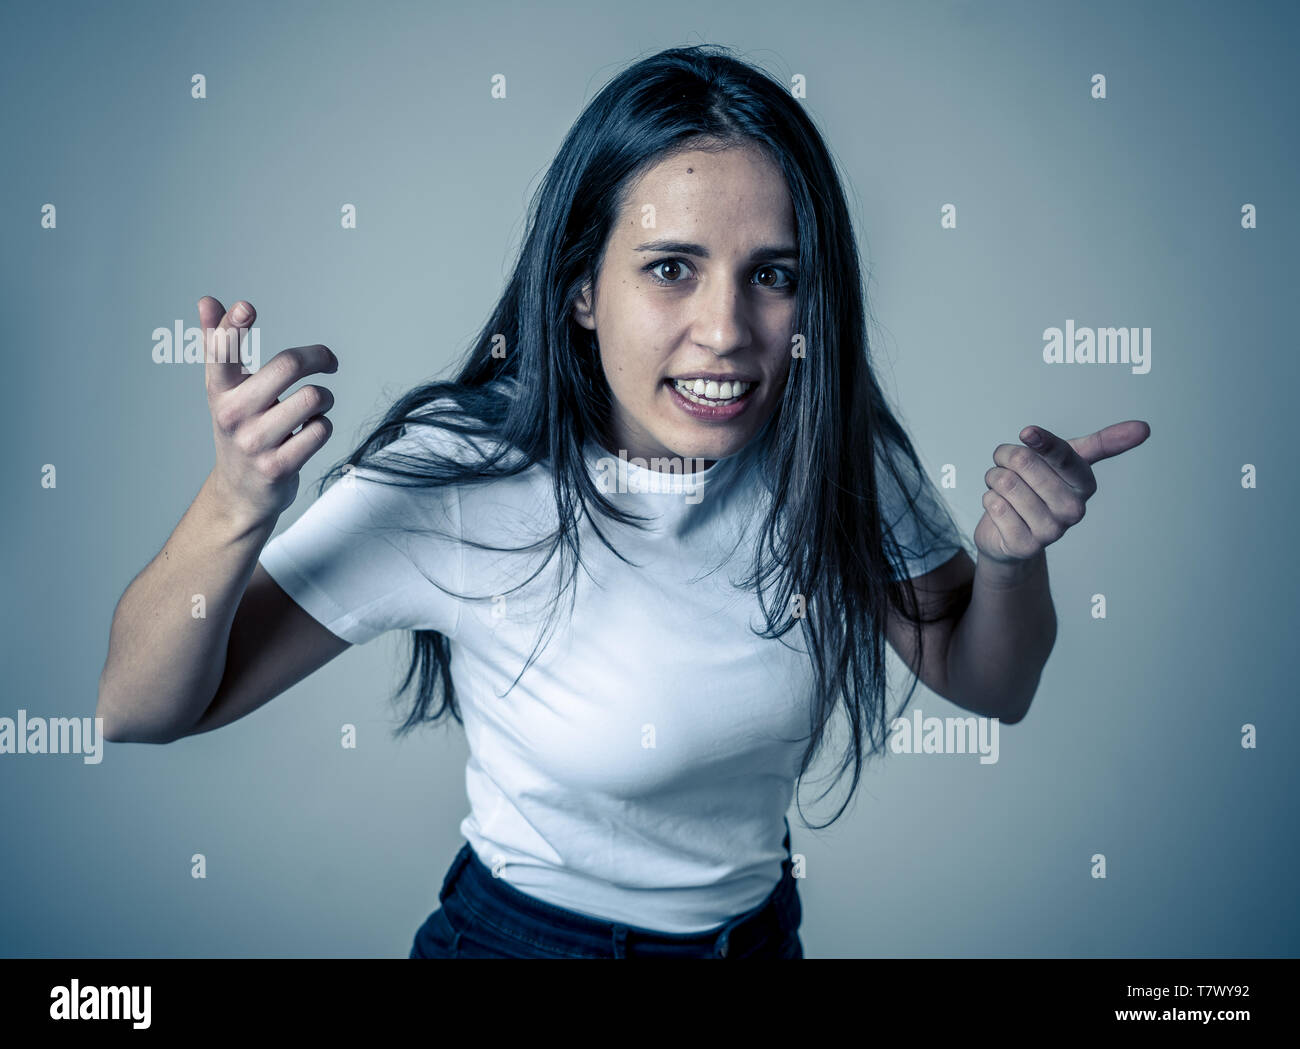 Close up of young attractive frustrated latin woman in stress with furious face. Looking mad and disappointed making angry gestures. In neutral backgr Stock Photo